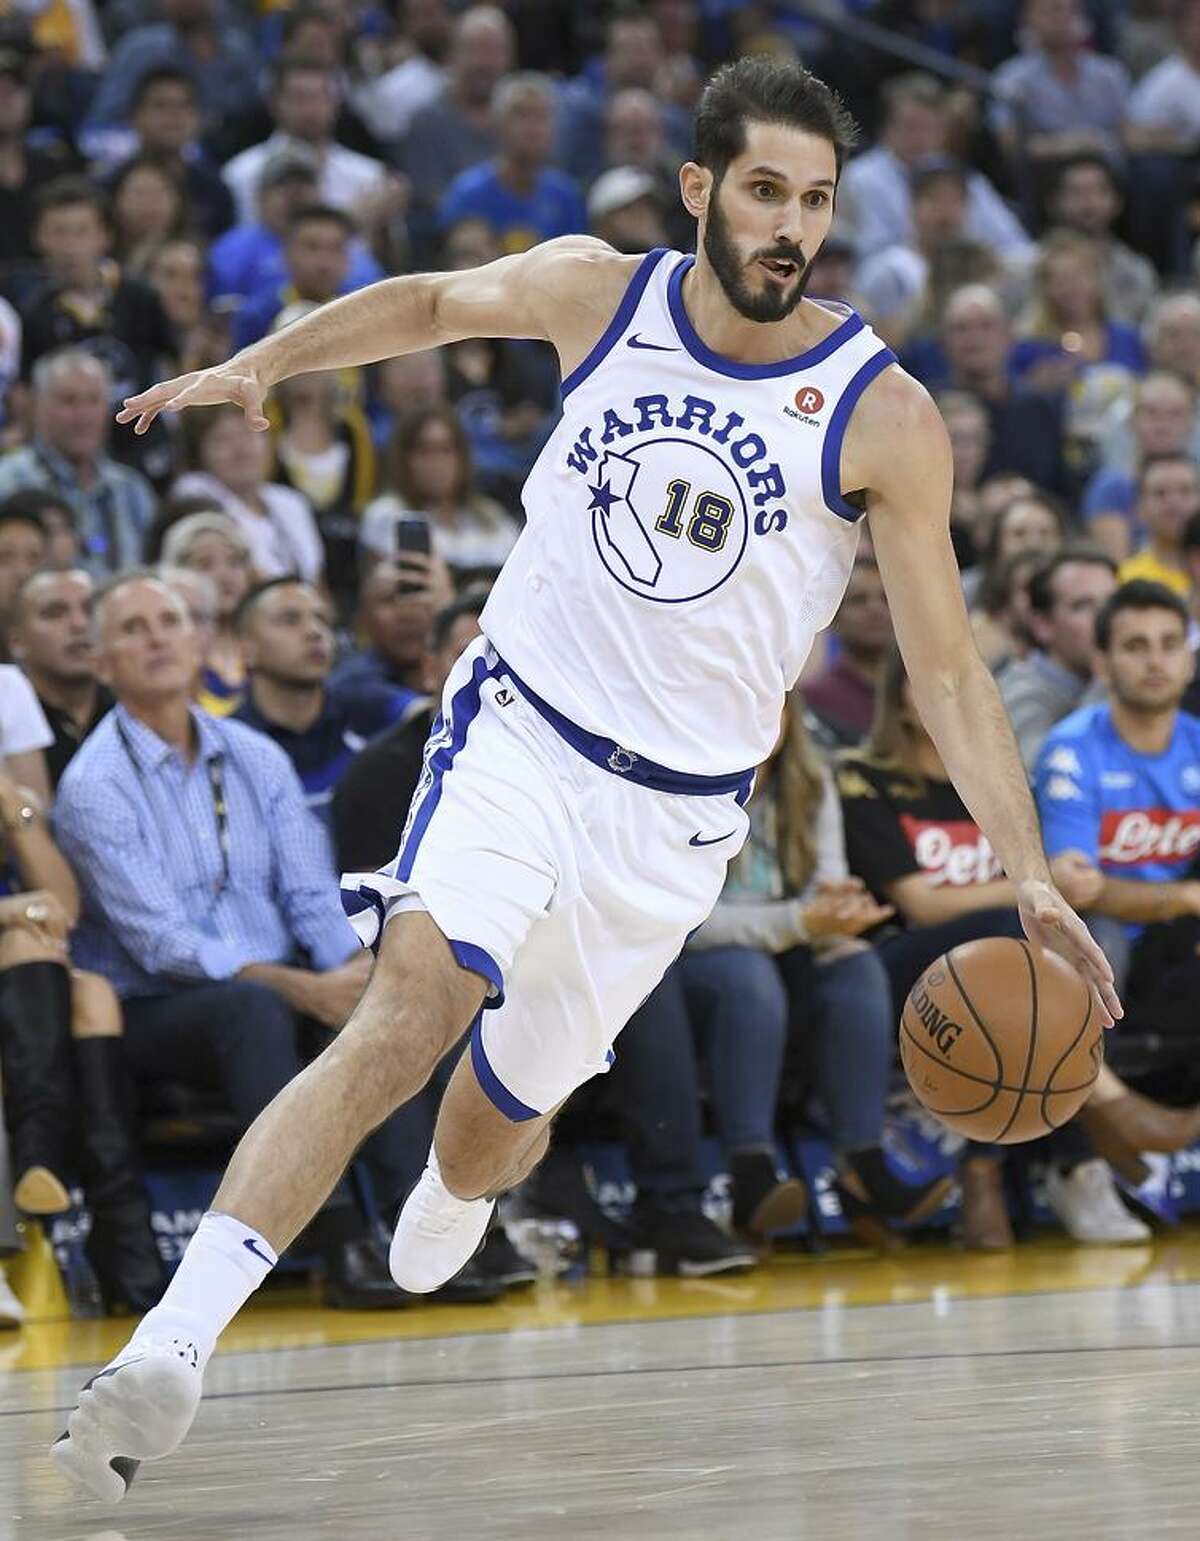 Omri Casspi has logged just 85 minutes of playing time with the Warriors, but has made them count.